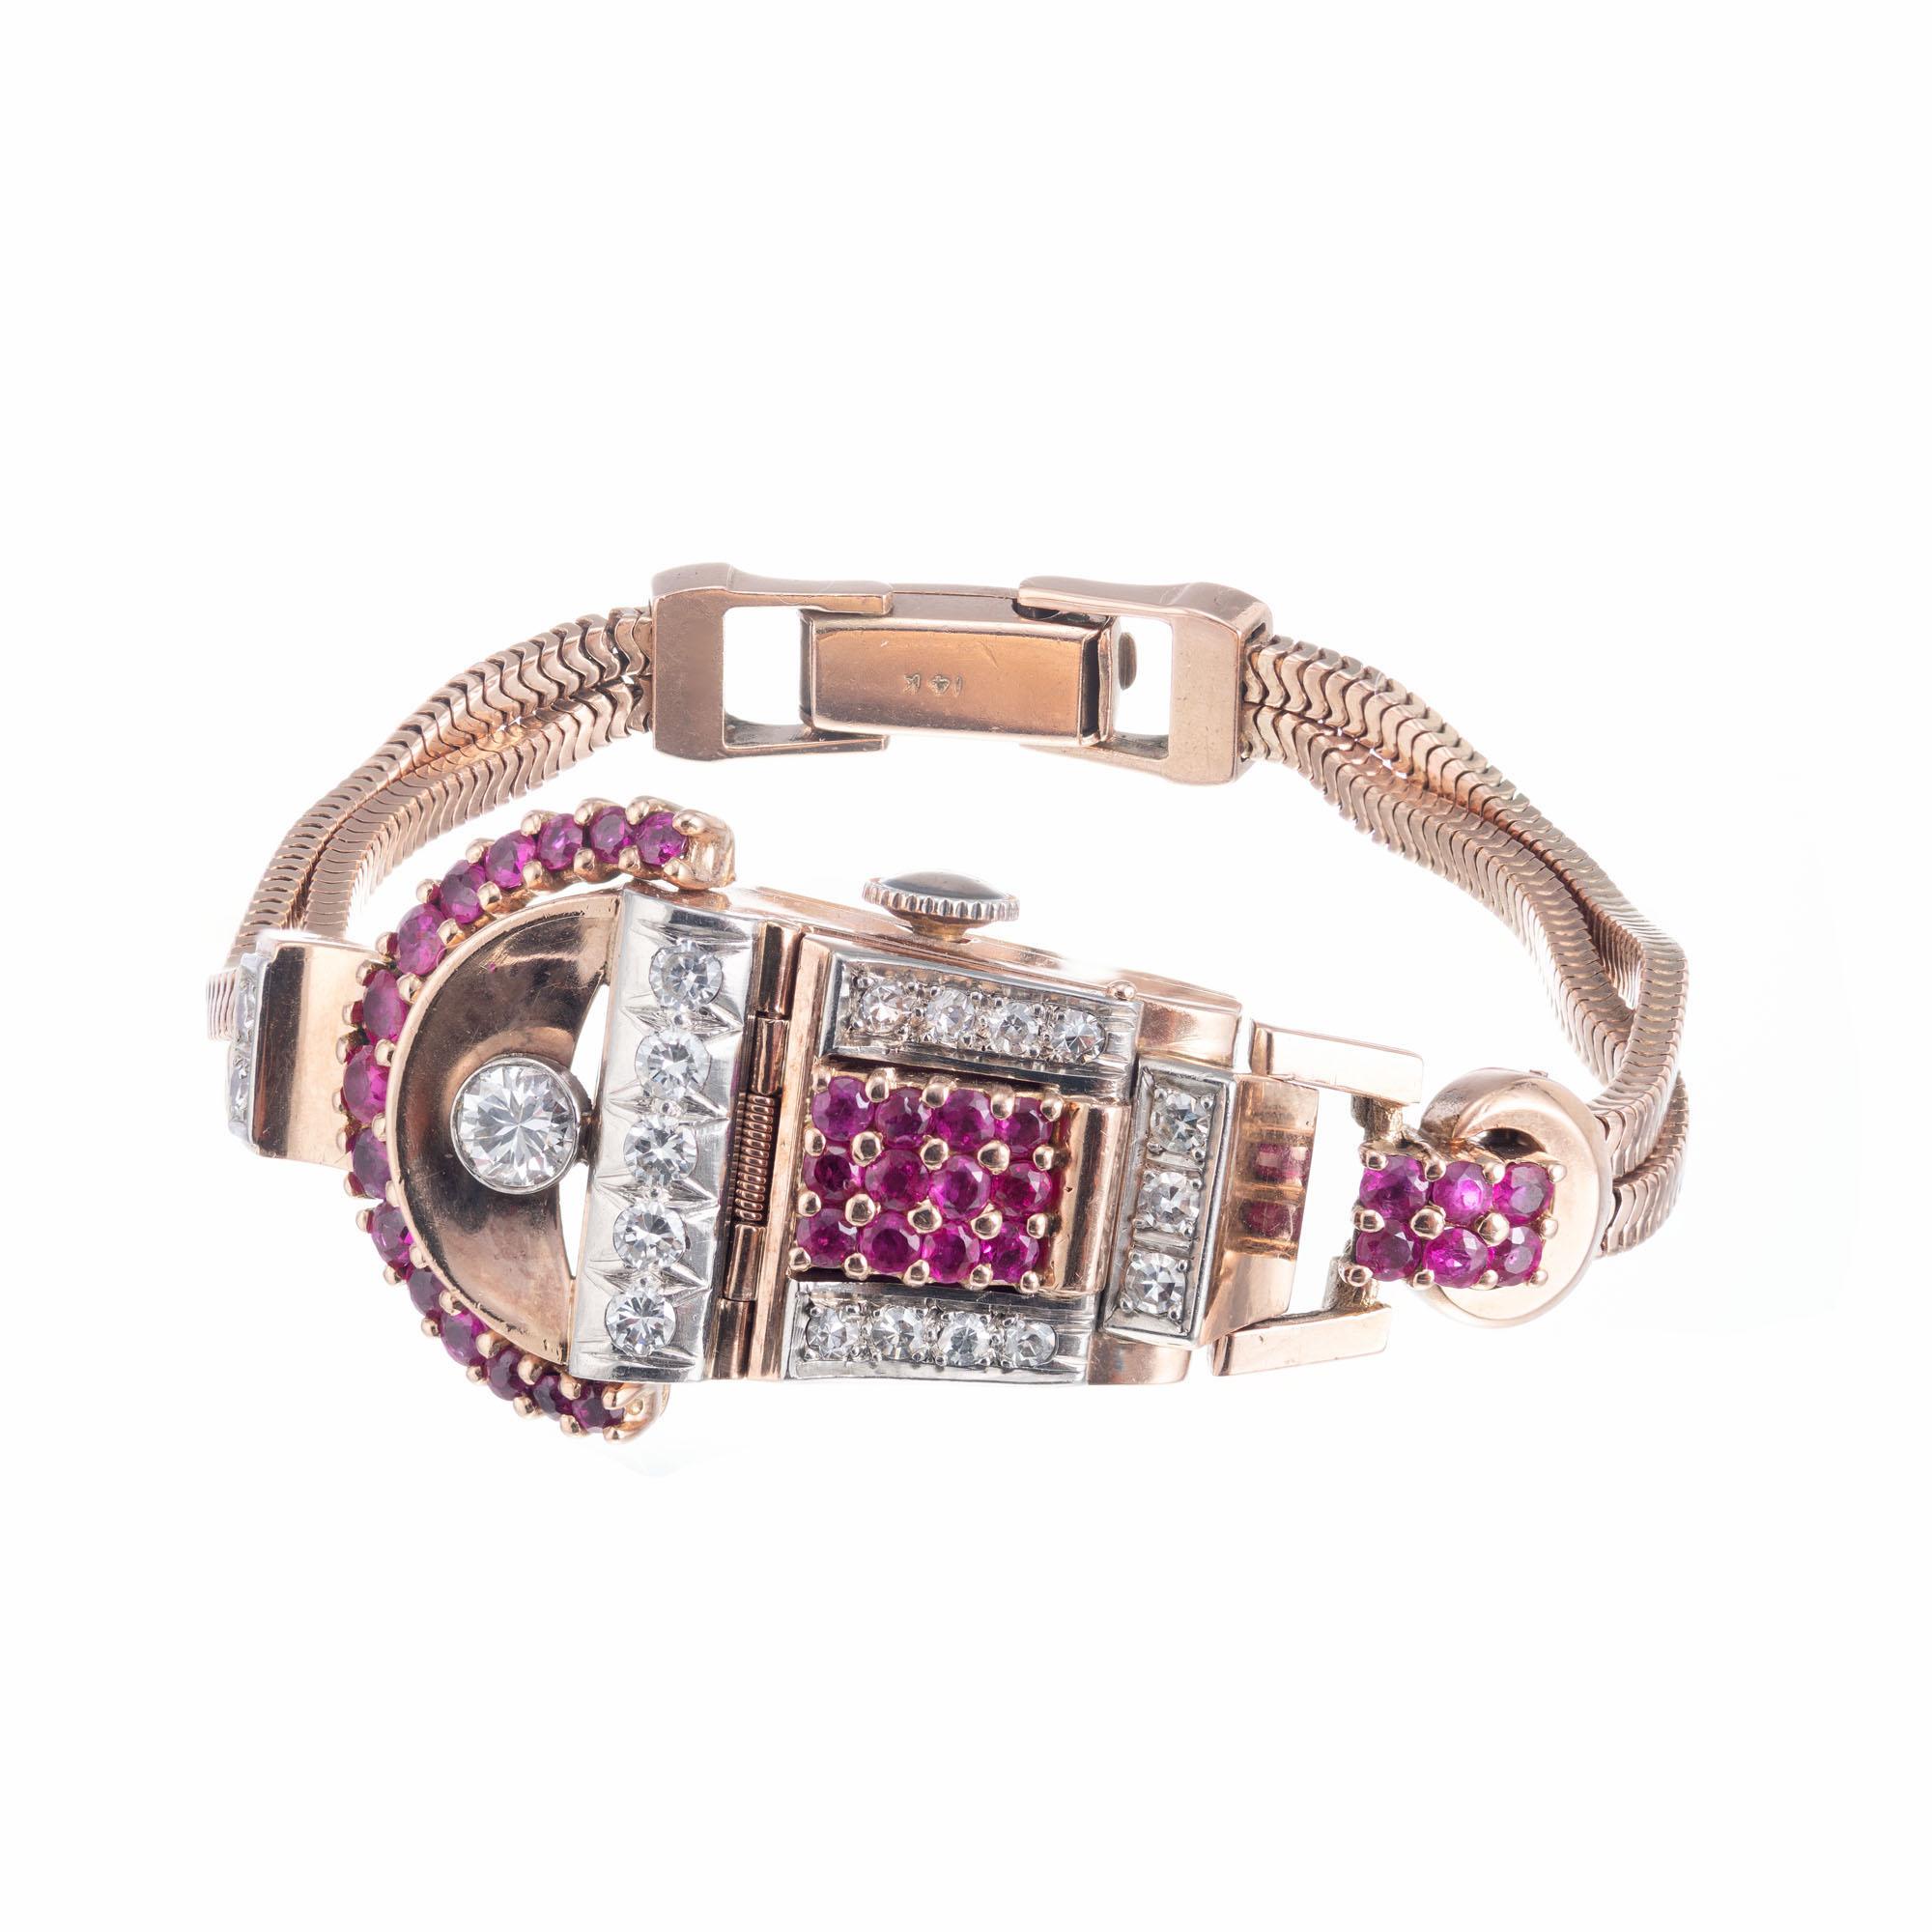 1940's Vintage Retro Asymmetrical covered wristwatch in 14k rose gold with a double snake chain band in Rose Gold. 19 round diamonds with 33 natural round accent rubies. 6 3/8 Inches

33 natural rubies, approx. 1.25 cts
19 diamonds H-I, VS, approx.